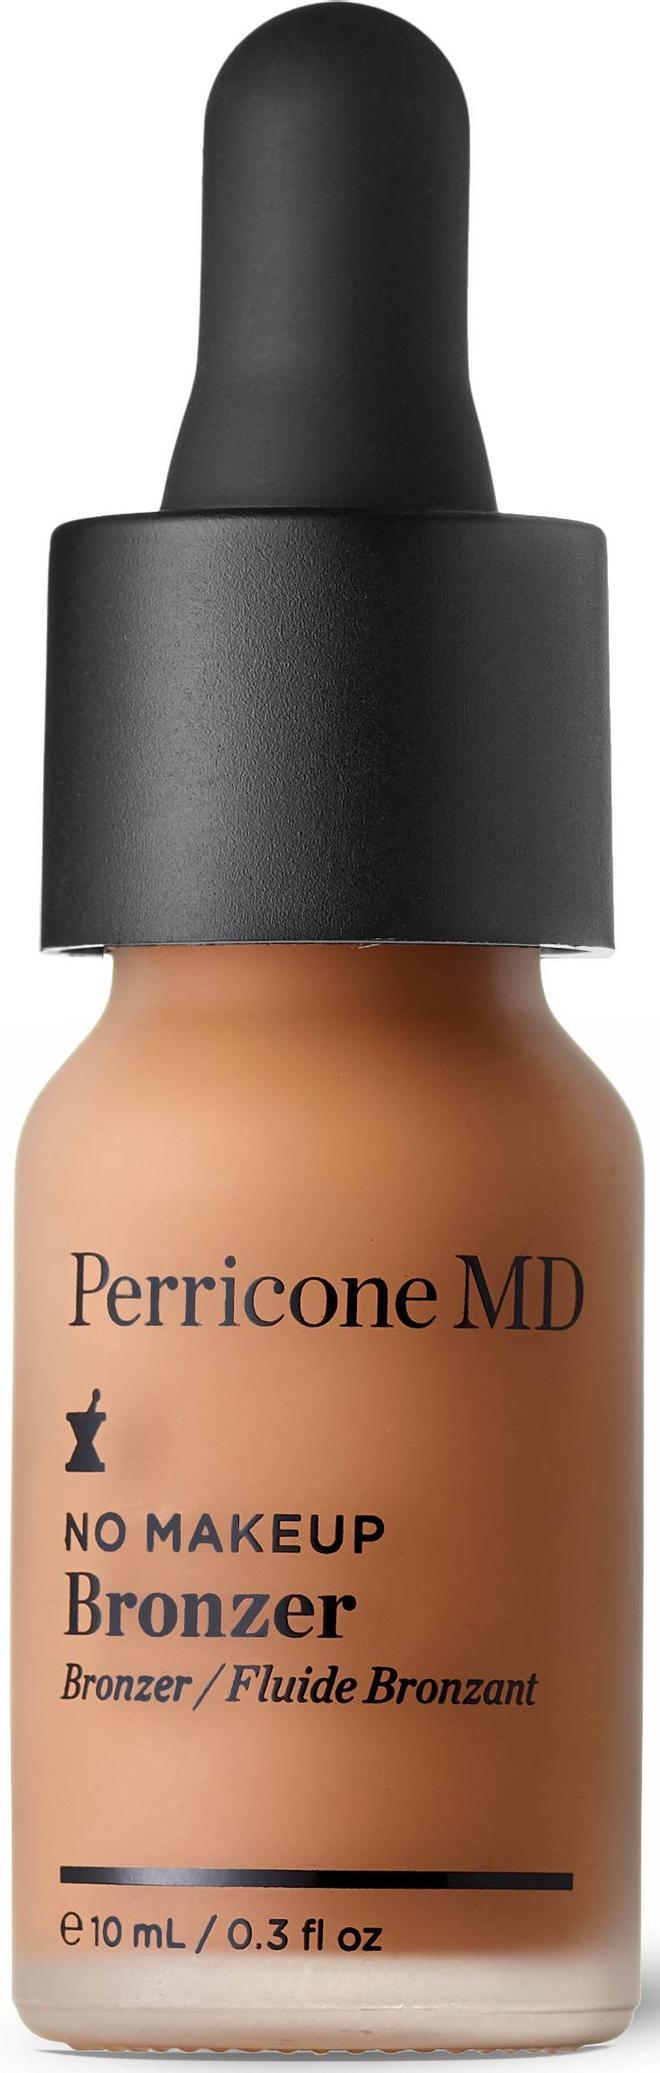 Perricone MD NO MAKEUP bronzer